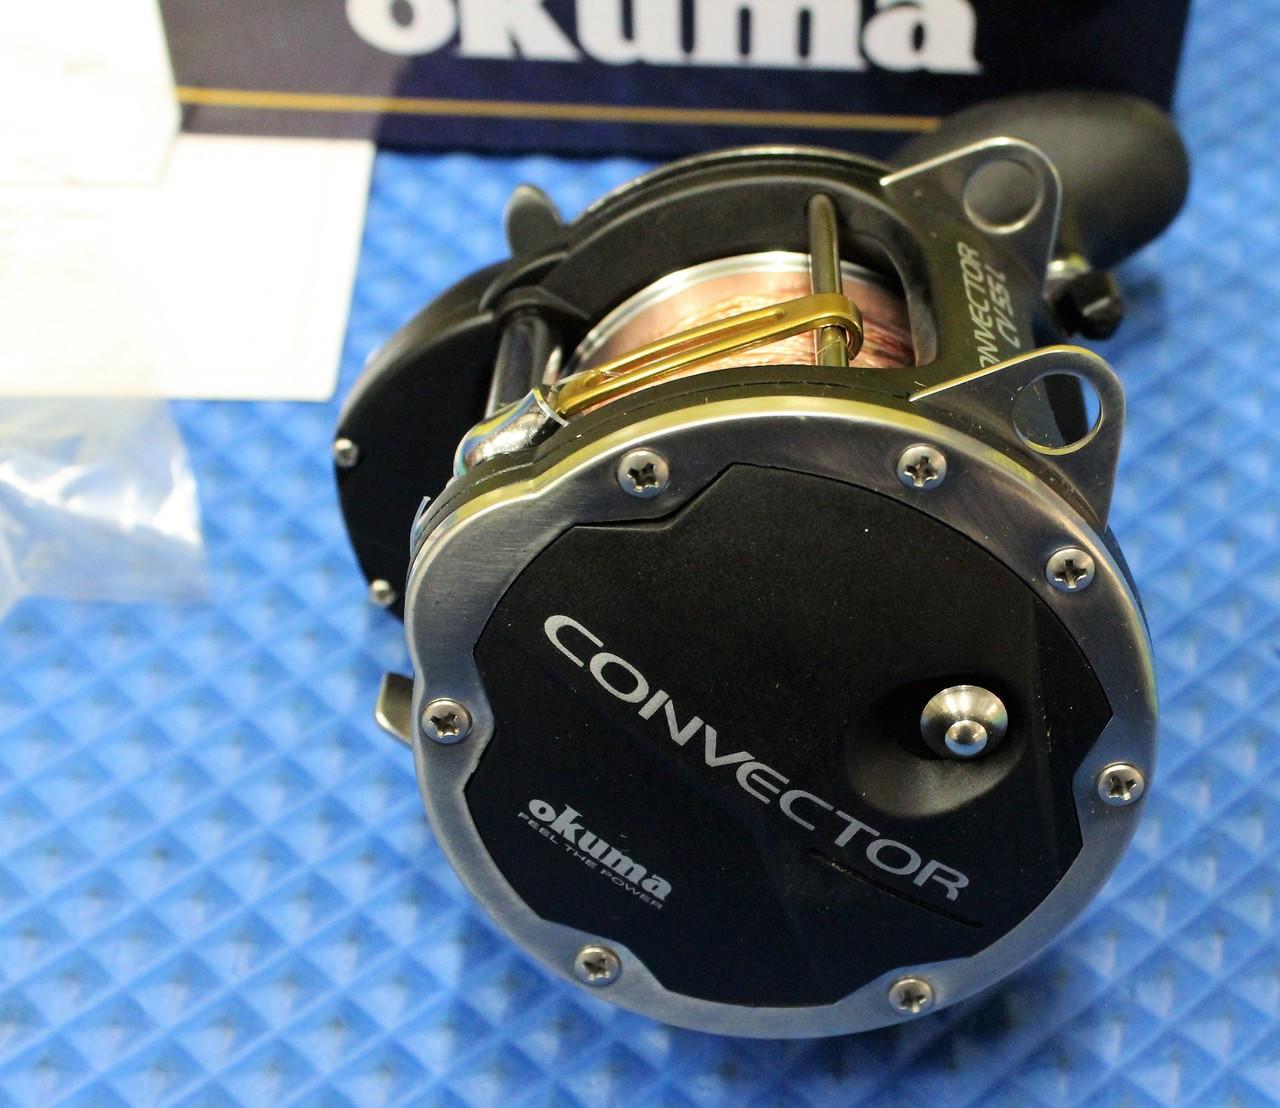 Okuma Convector Levelwind Reel CV 55L Prespooled With 45# Copper, 25# Solar Green Backing, 50 Feet 20# Leader CHOOSE YOUR COPPER LENGTH